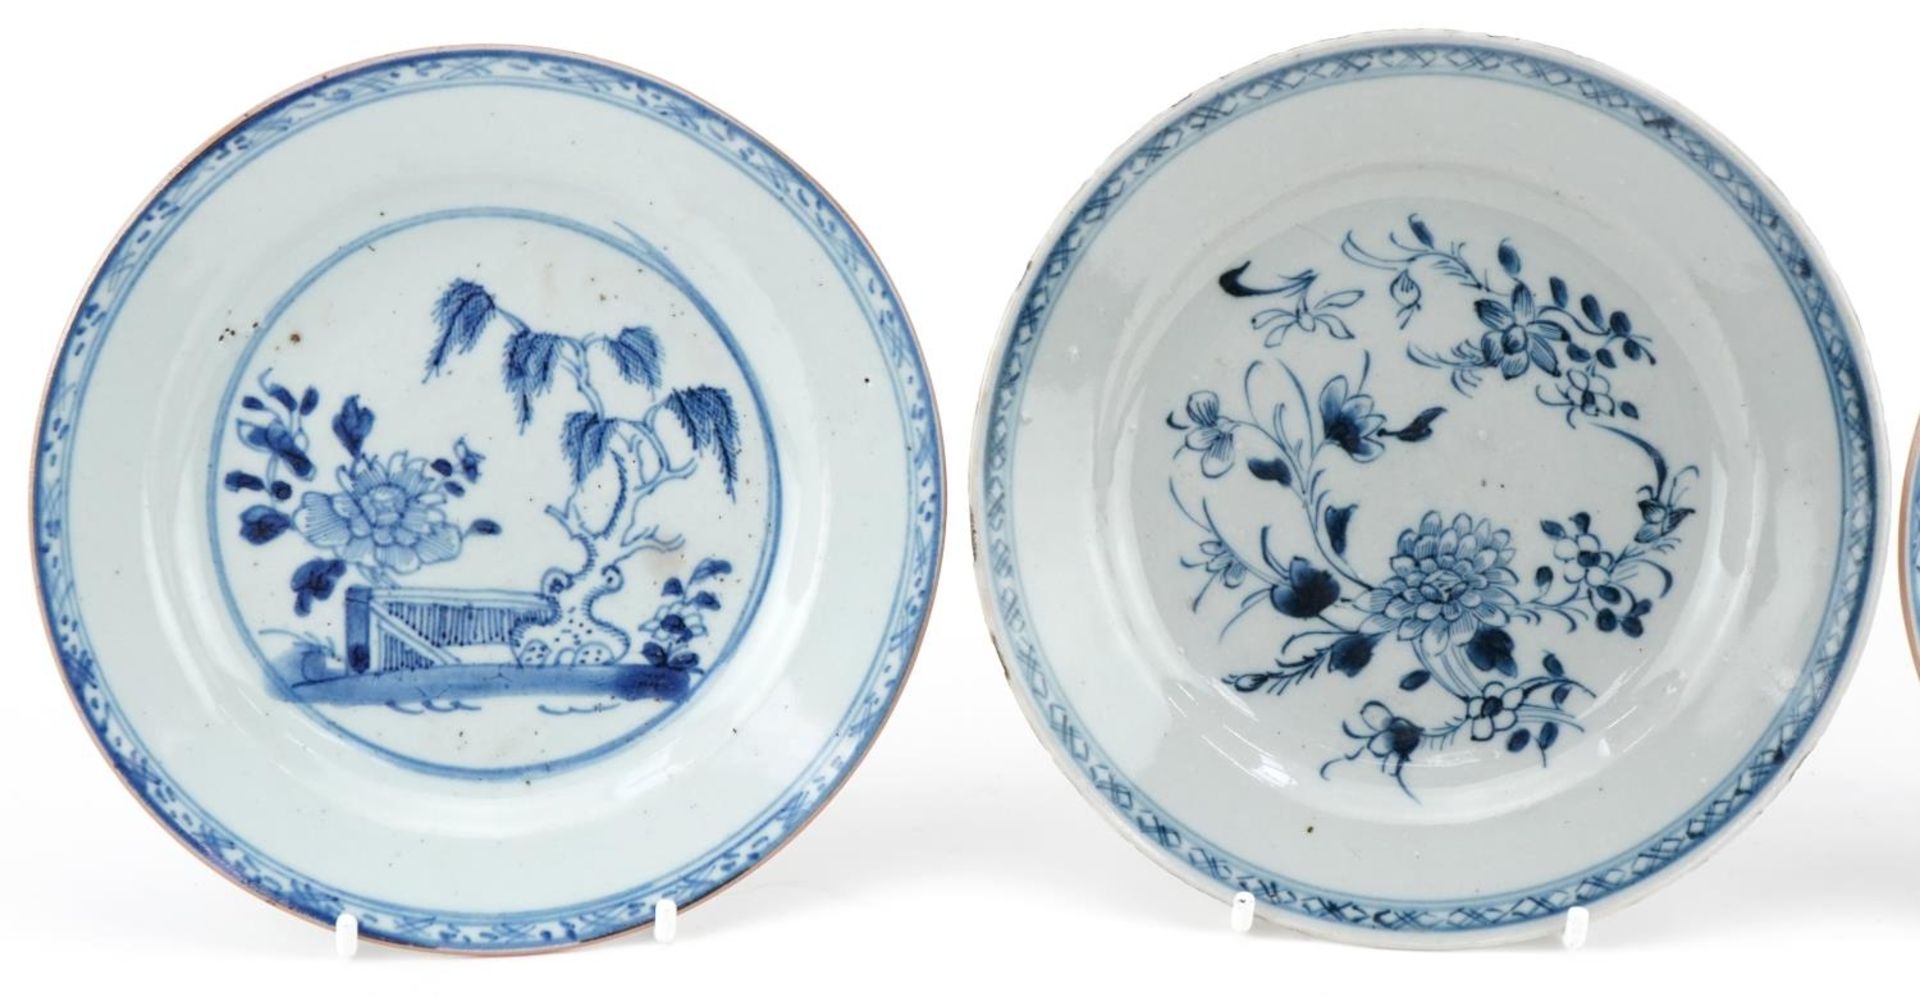 Three 18th century hand painted blue and white plates, two in the Willow pattern, one with - Image 2 of 4